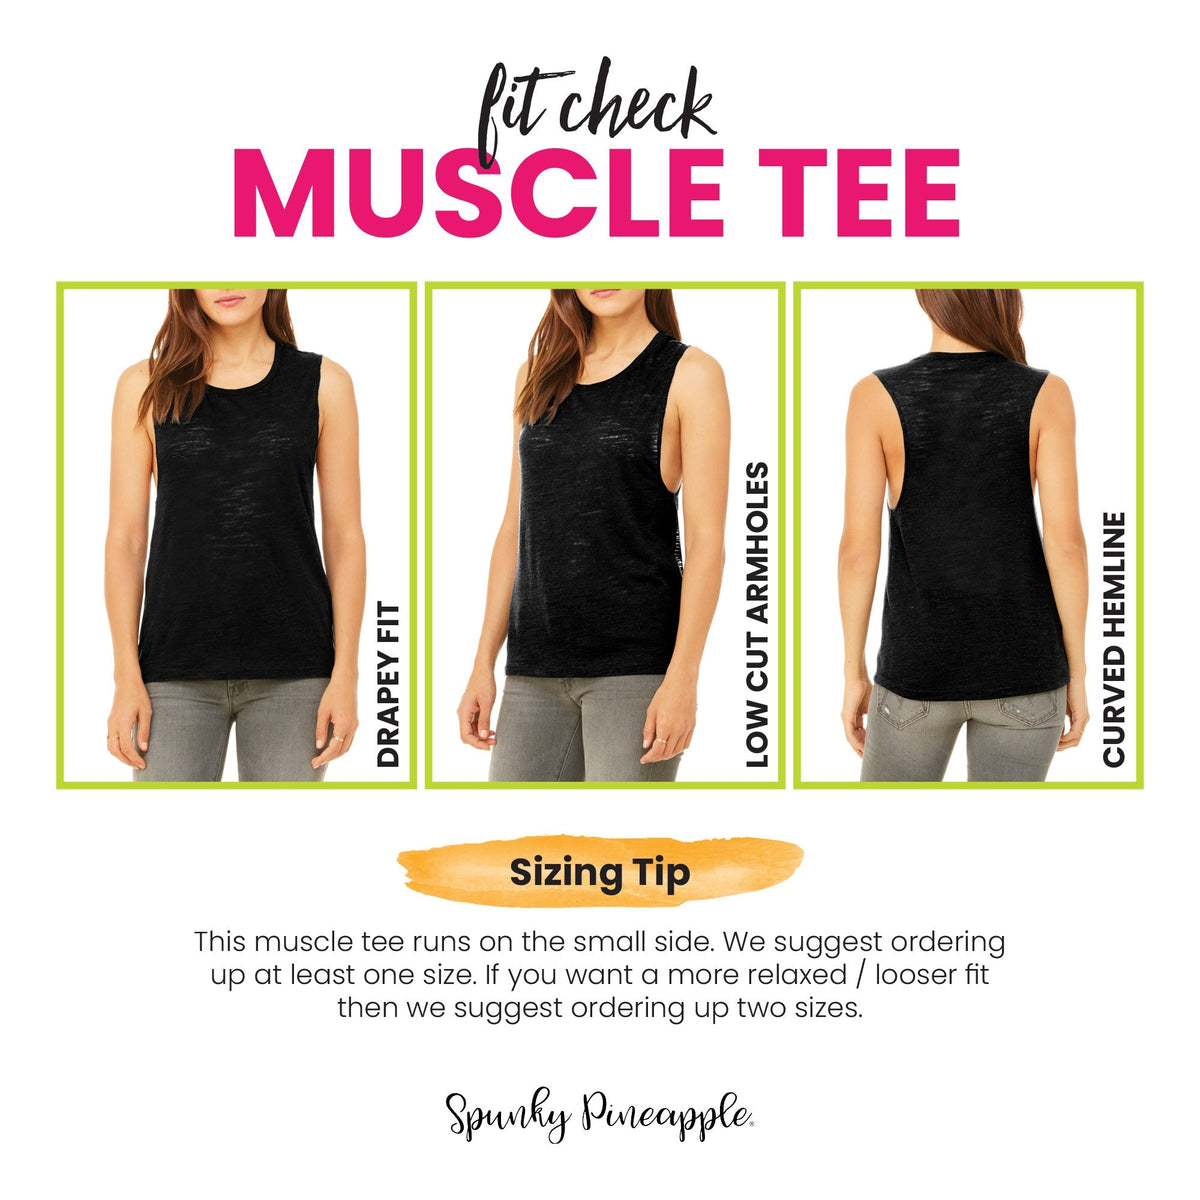 Get Lucky at the Barre Muscle Tee